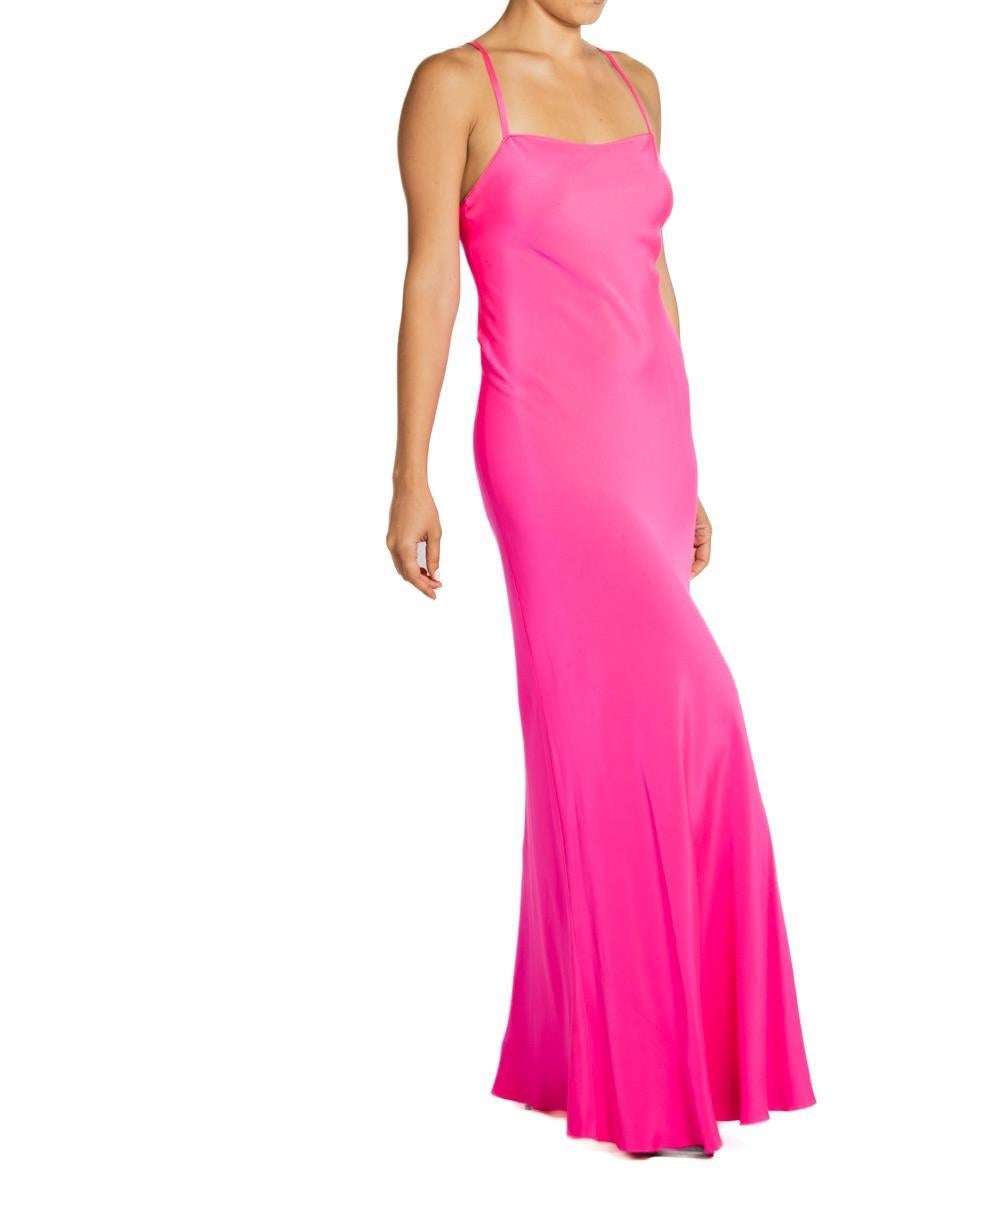 2000S Ralph Lauren Neon Pink Silk Faille Bias Cut Gown In Excellent Condition For Sale In New York, NY